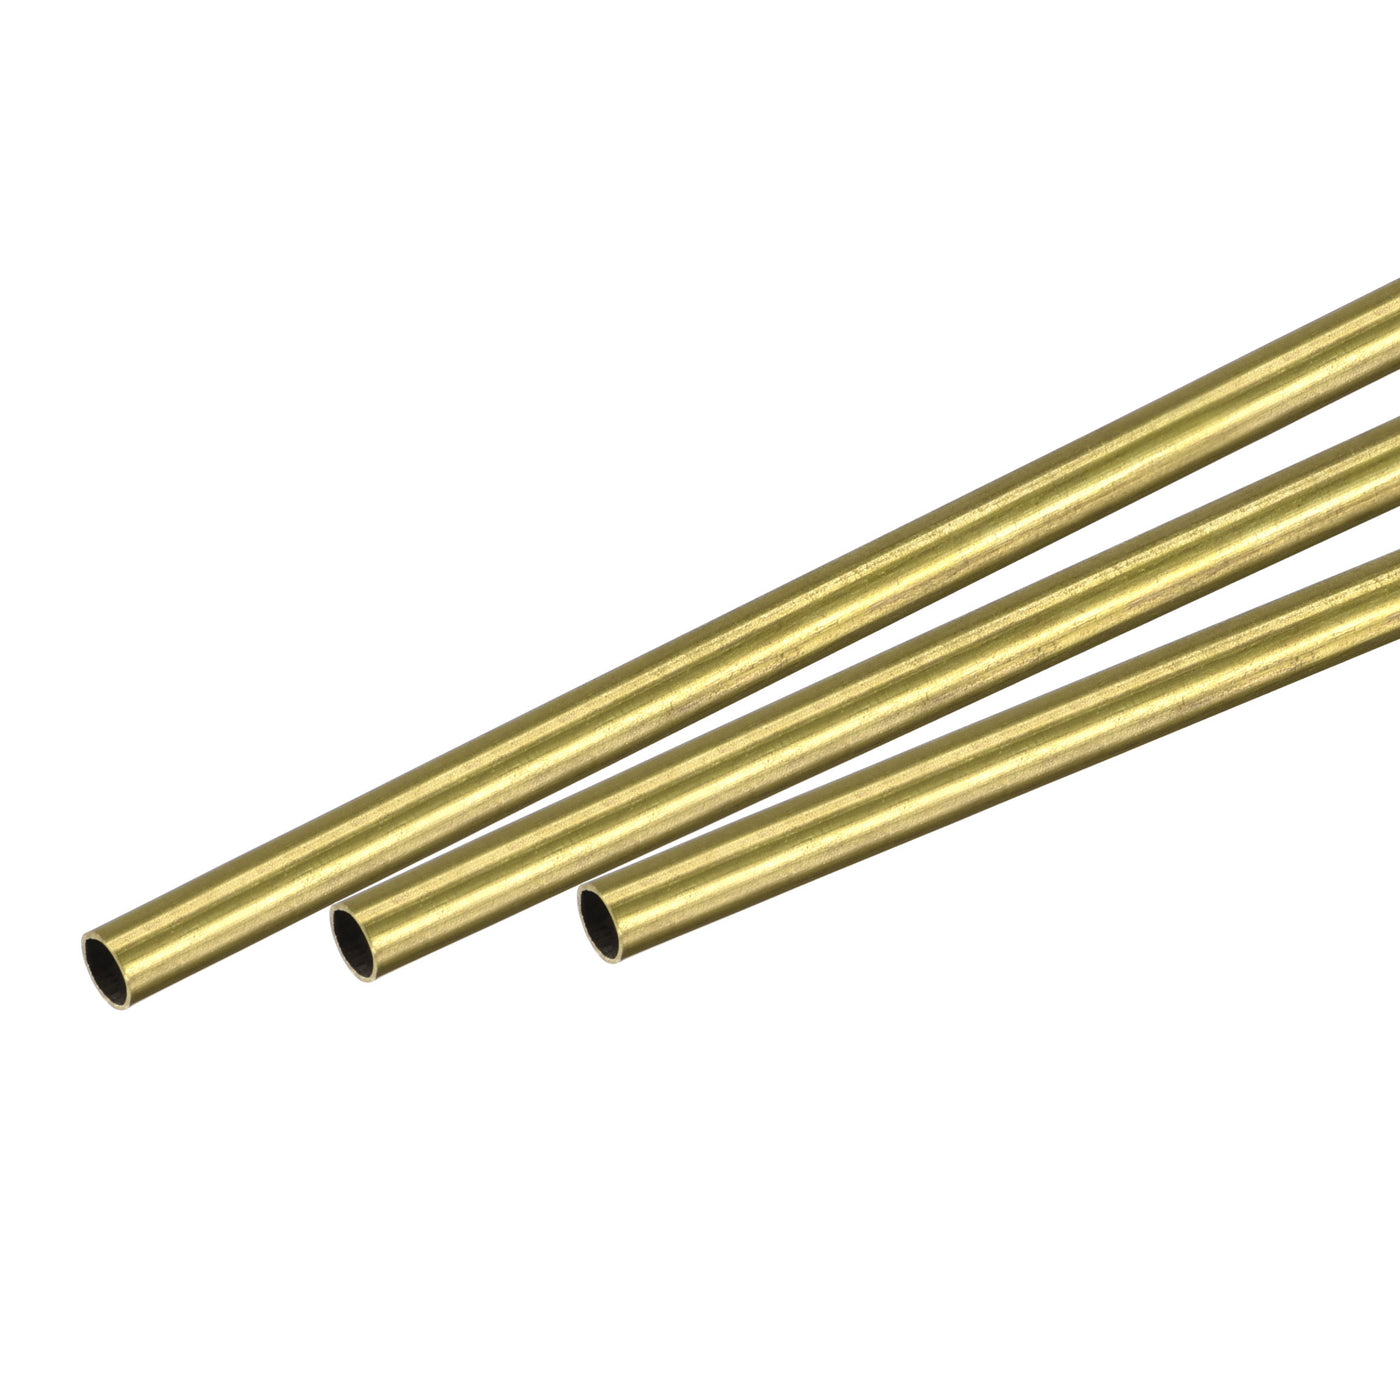 uxcell Uxcell 3Pcs 3mm x 0.2mm x 400mm Seamless Straight Brass Tube for Industry DIY Projects